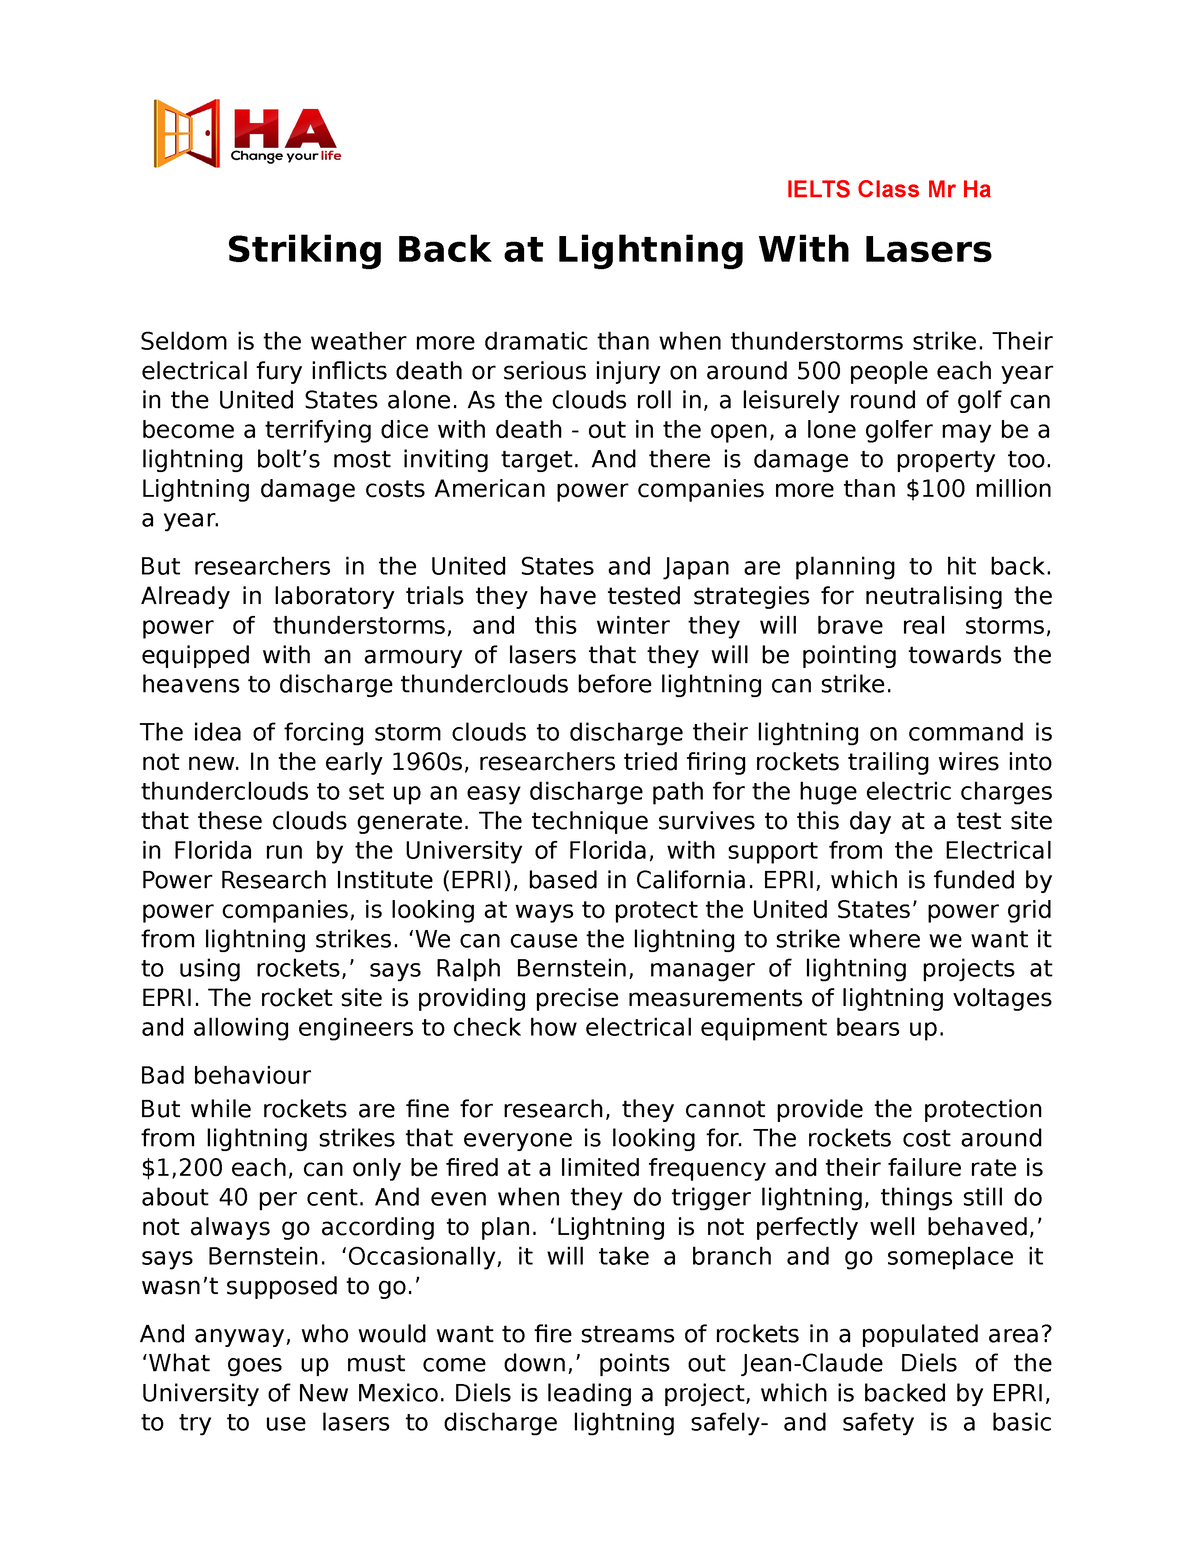 Ielts Reading CAM 8 TEST 3 - Striking Back at Lightning With Lasers Seldom is the weather more - Studocu